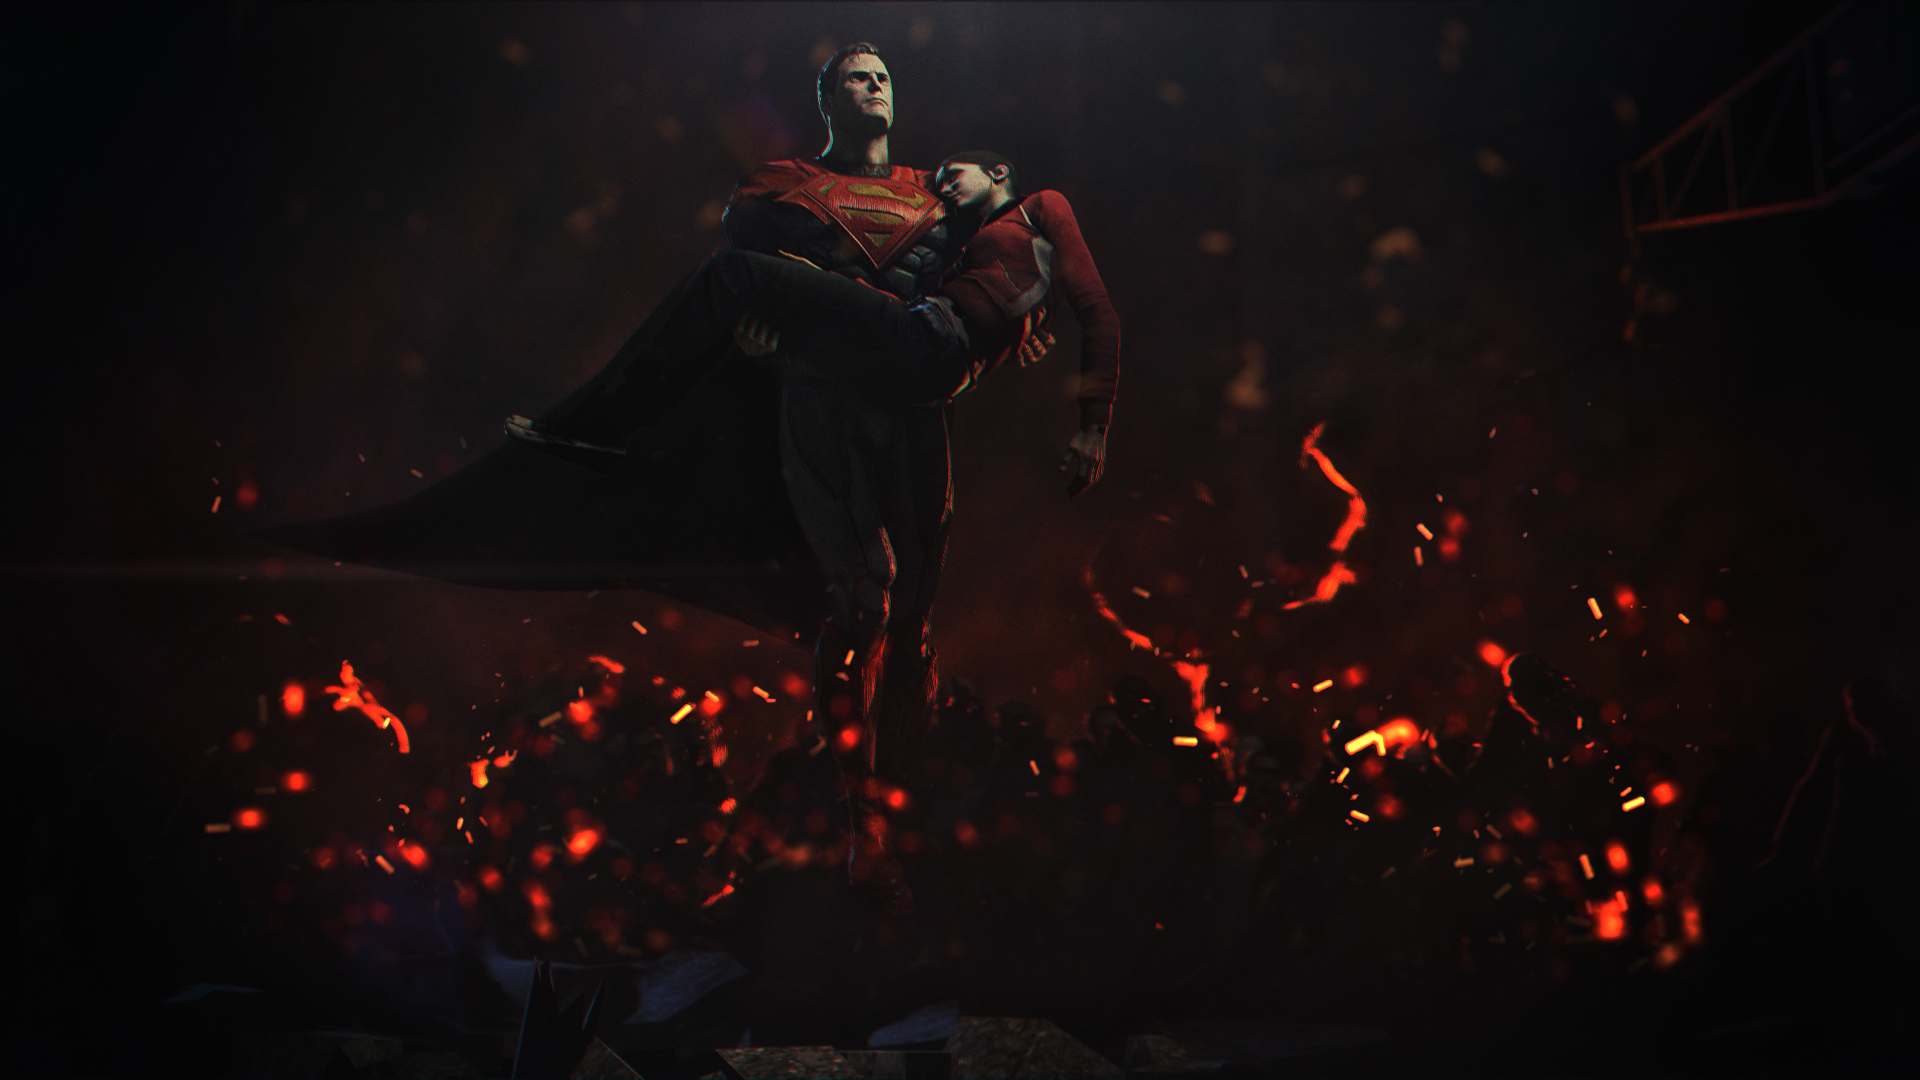 Injustice: Gods Among Us Wallpapers